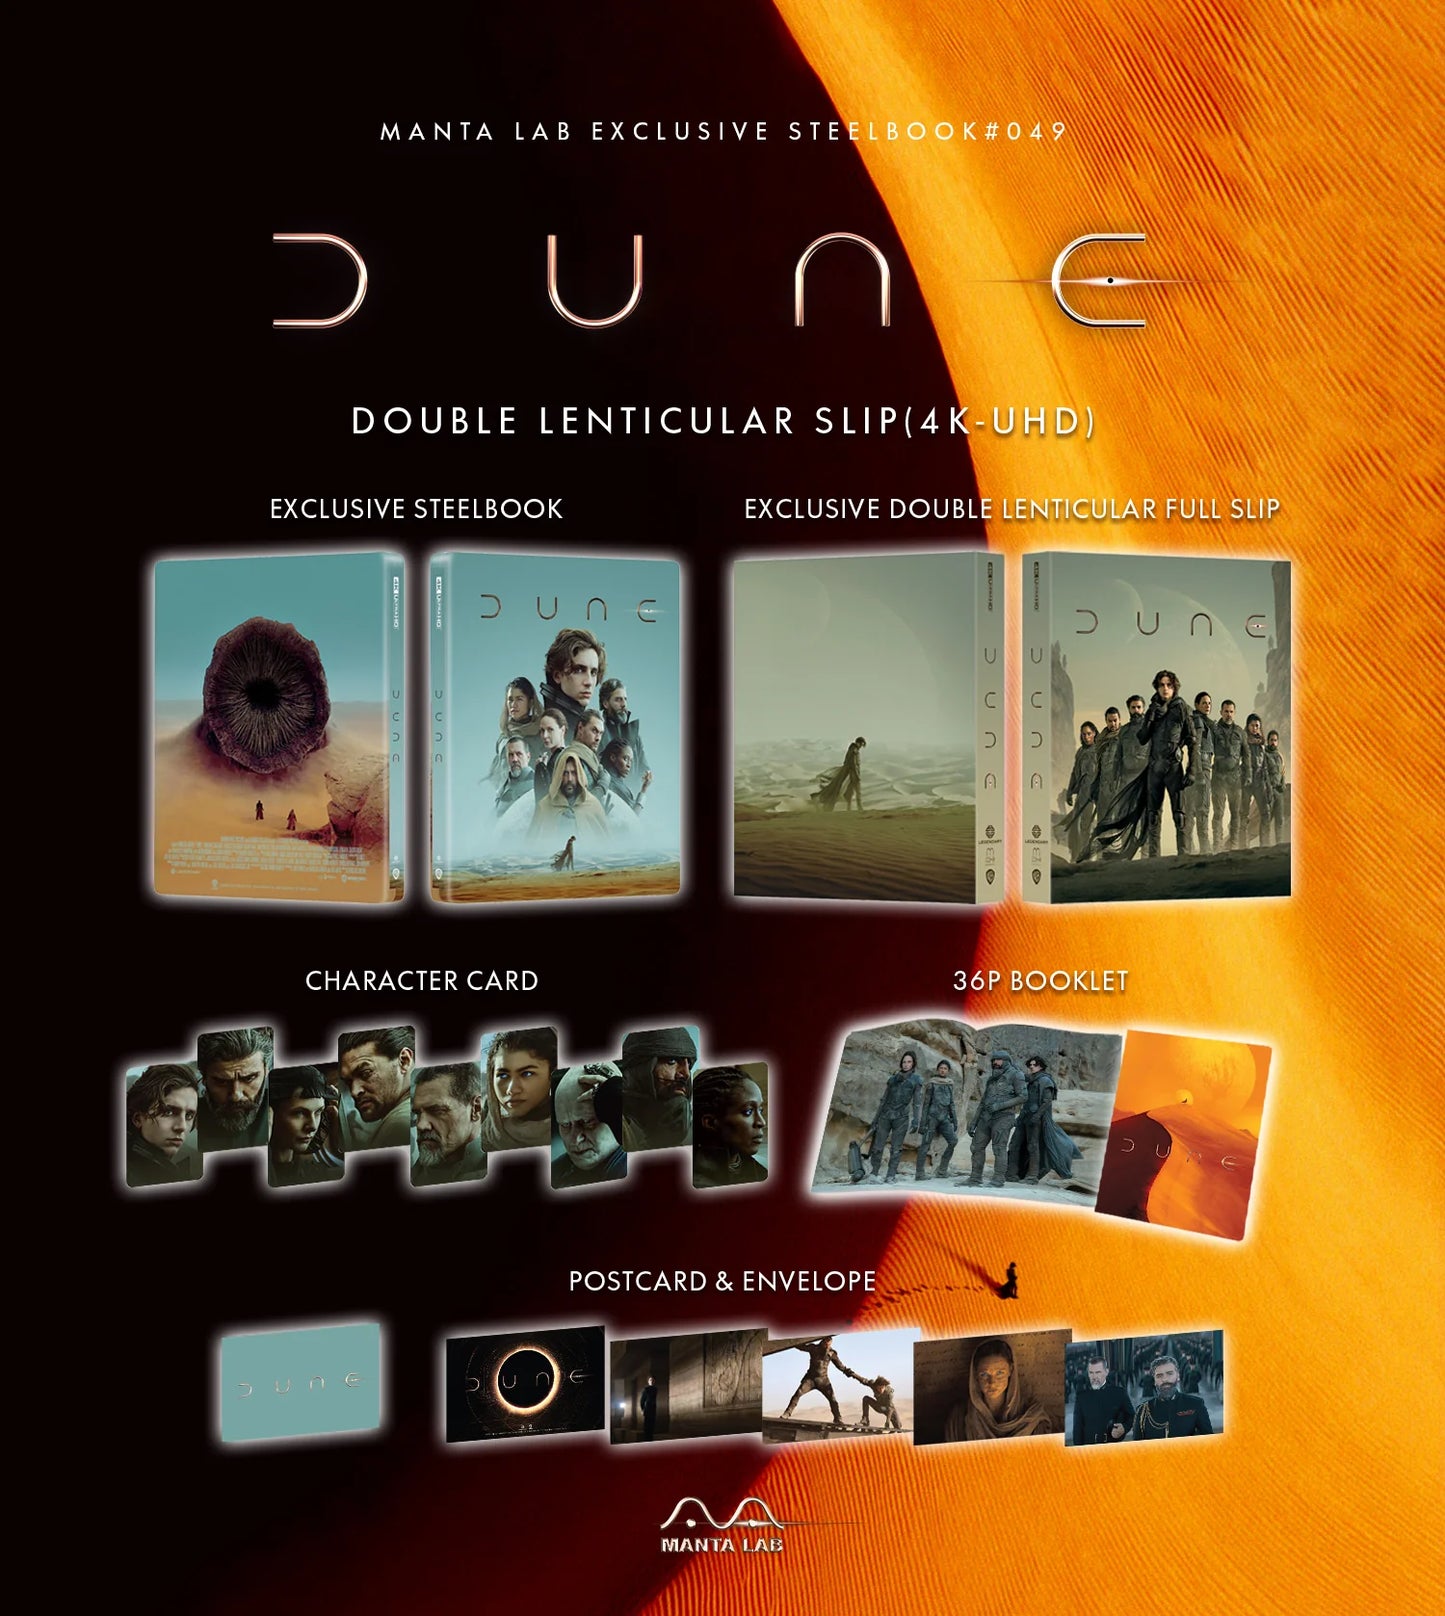 Dune 4K Blu-ray Steelbook Collectong Manta Lab Exclusive ME#49 One Click Box Set